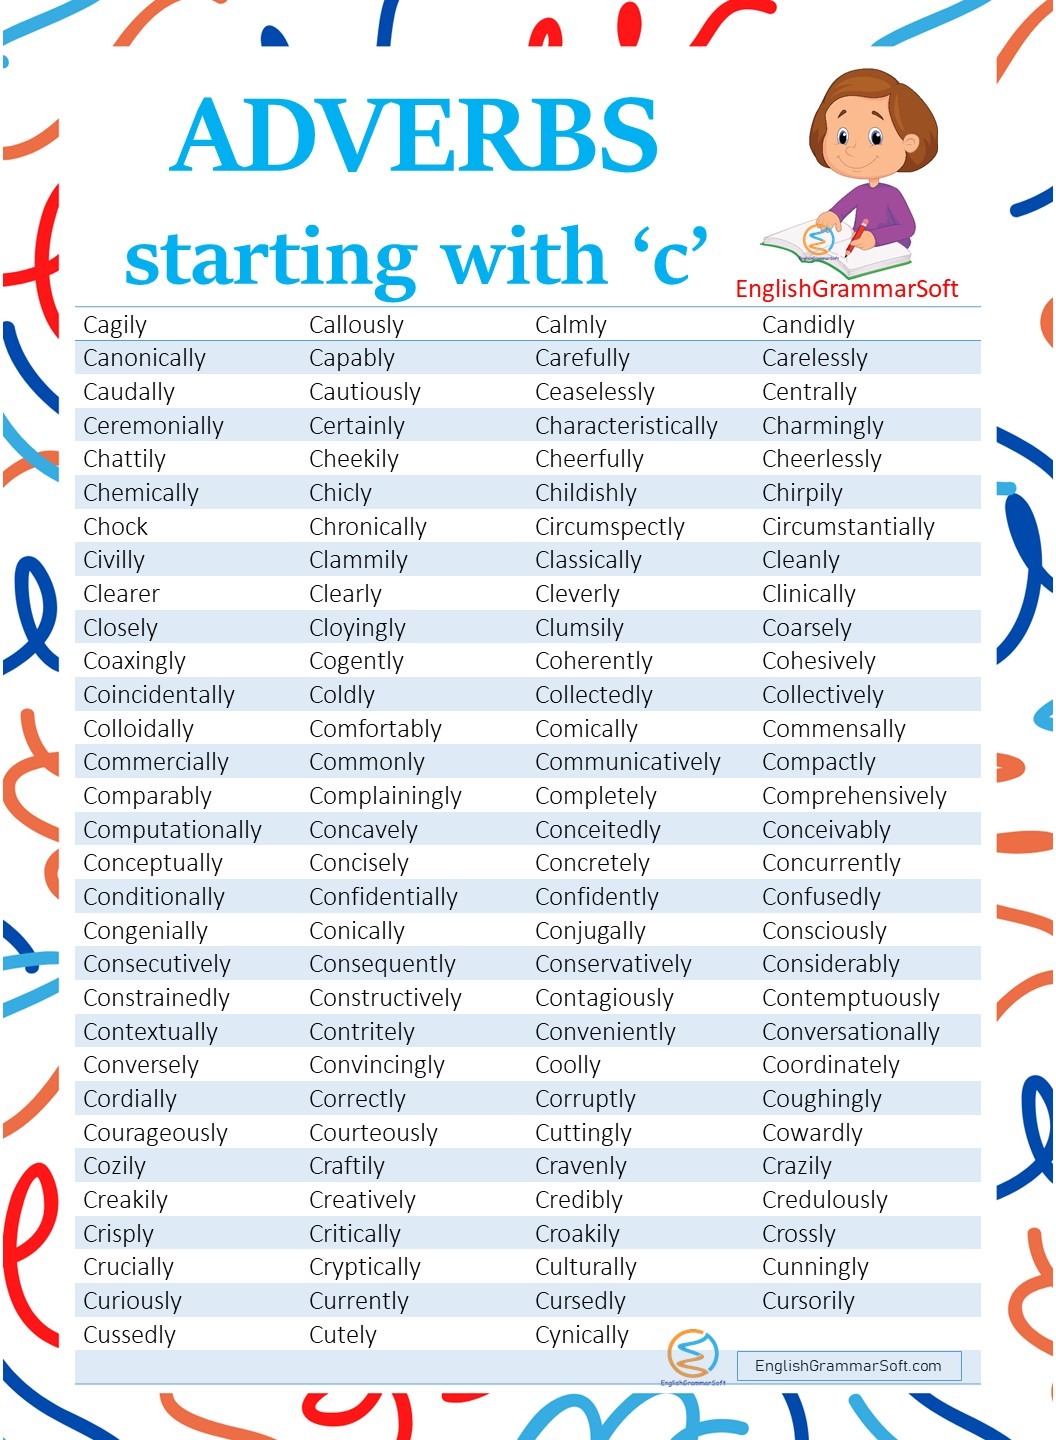 adverbs starting with 'c'